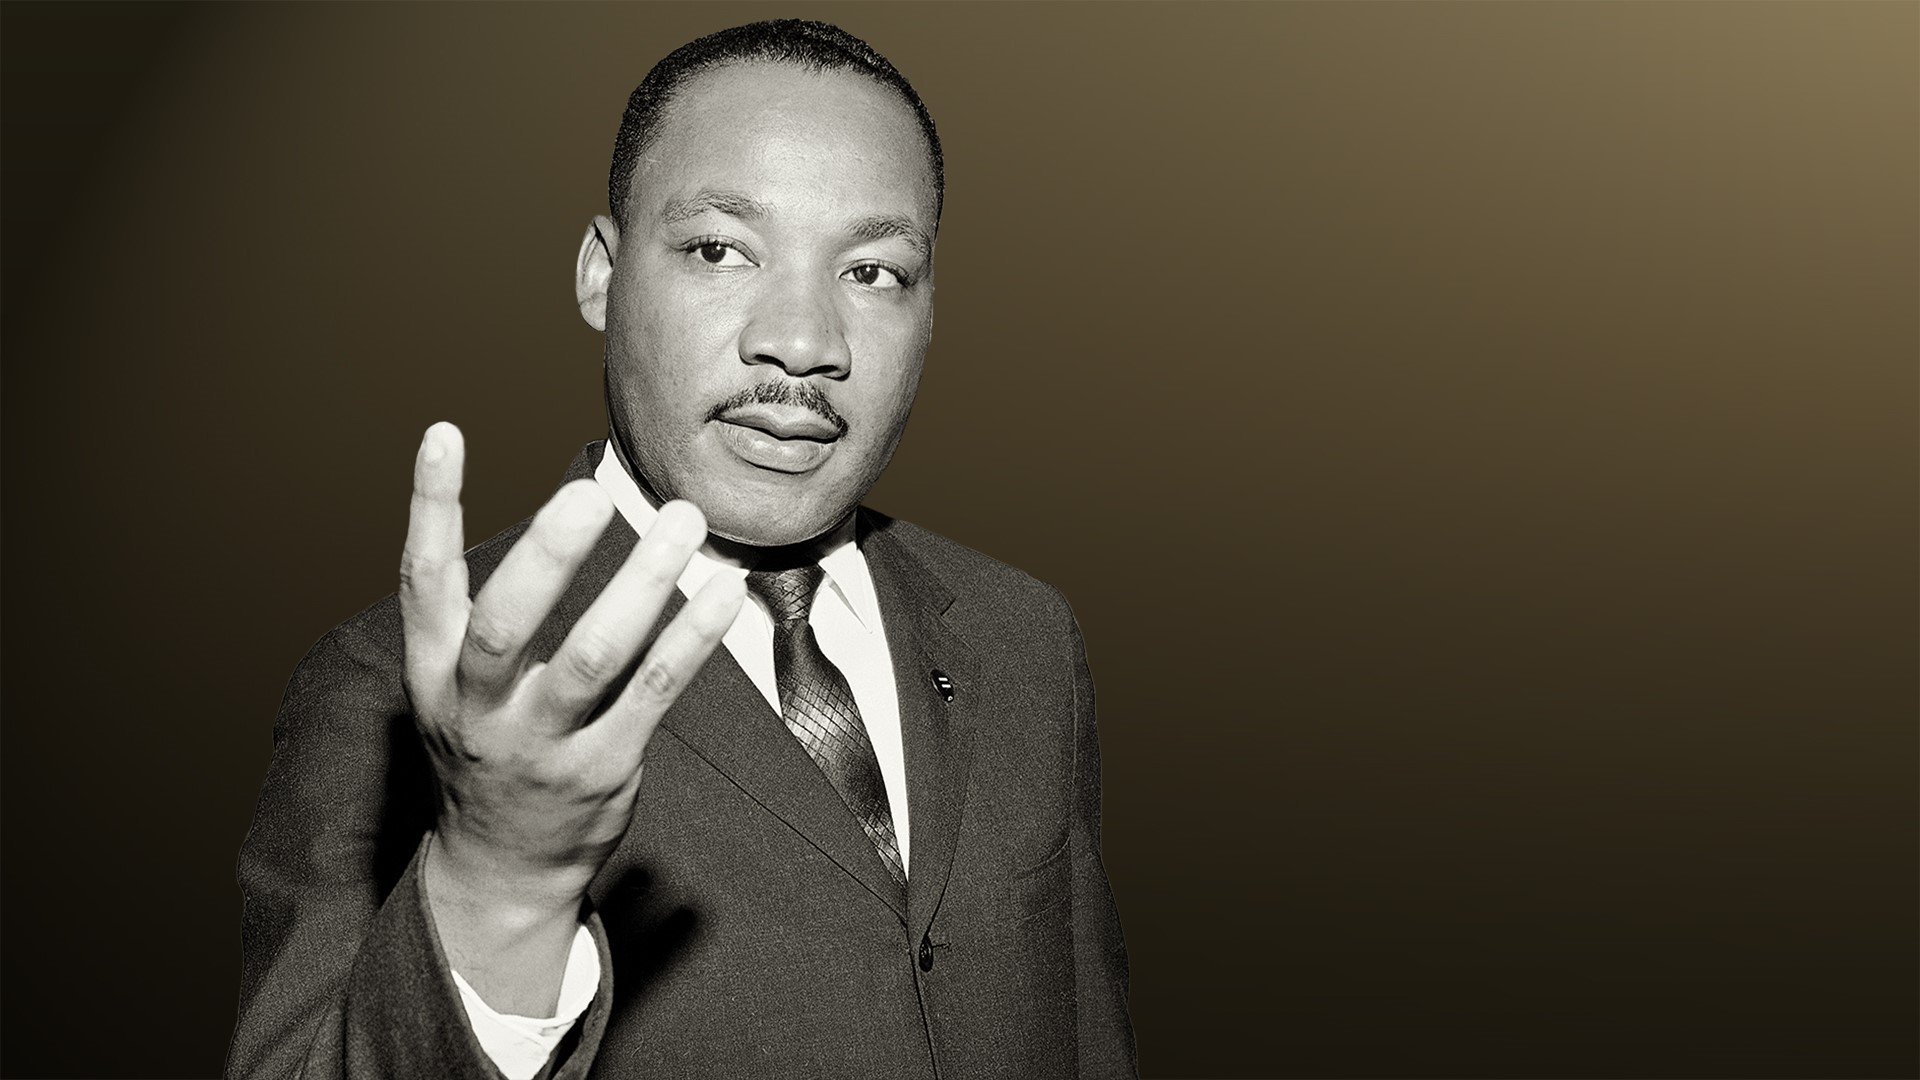 Zenzele Consignment shop, a local non-profit, is hosting their third annual Dr. Martin Luther King Jr. Day of Service on Monday, January 20, from 10am-3pm. Zenzele is located at  2205-F University Drive in the Northwood Plaza in Huntsville.